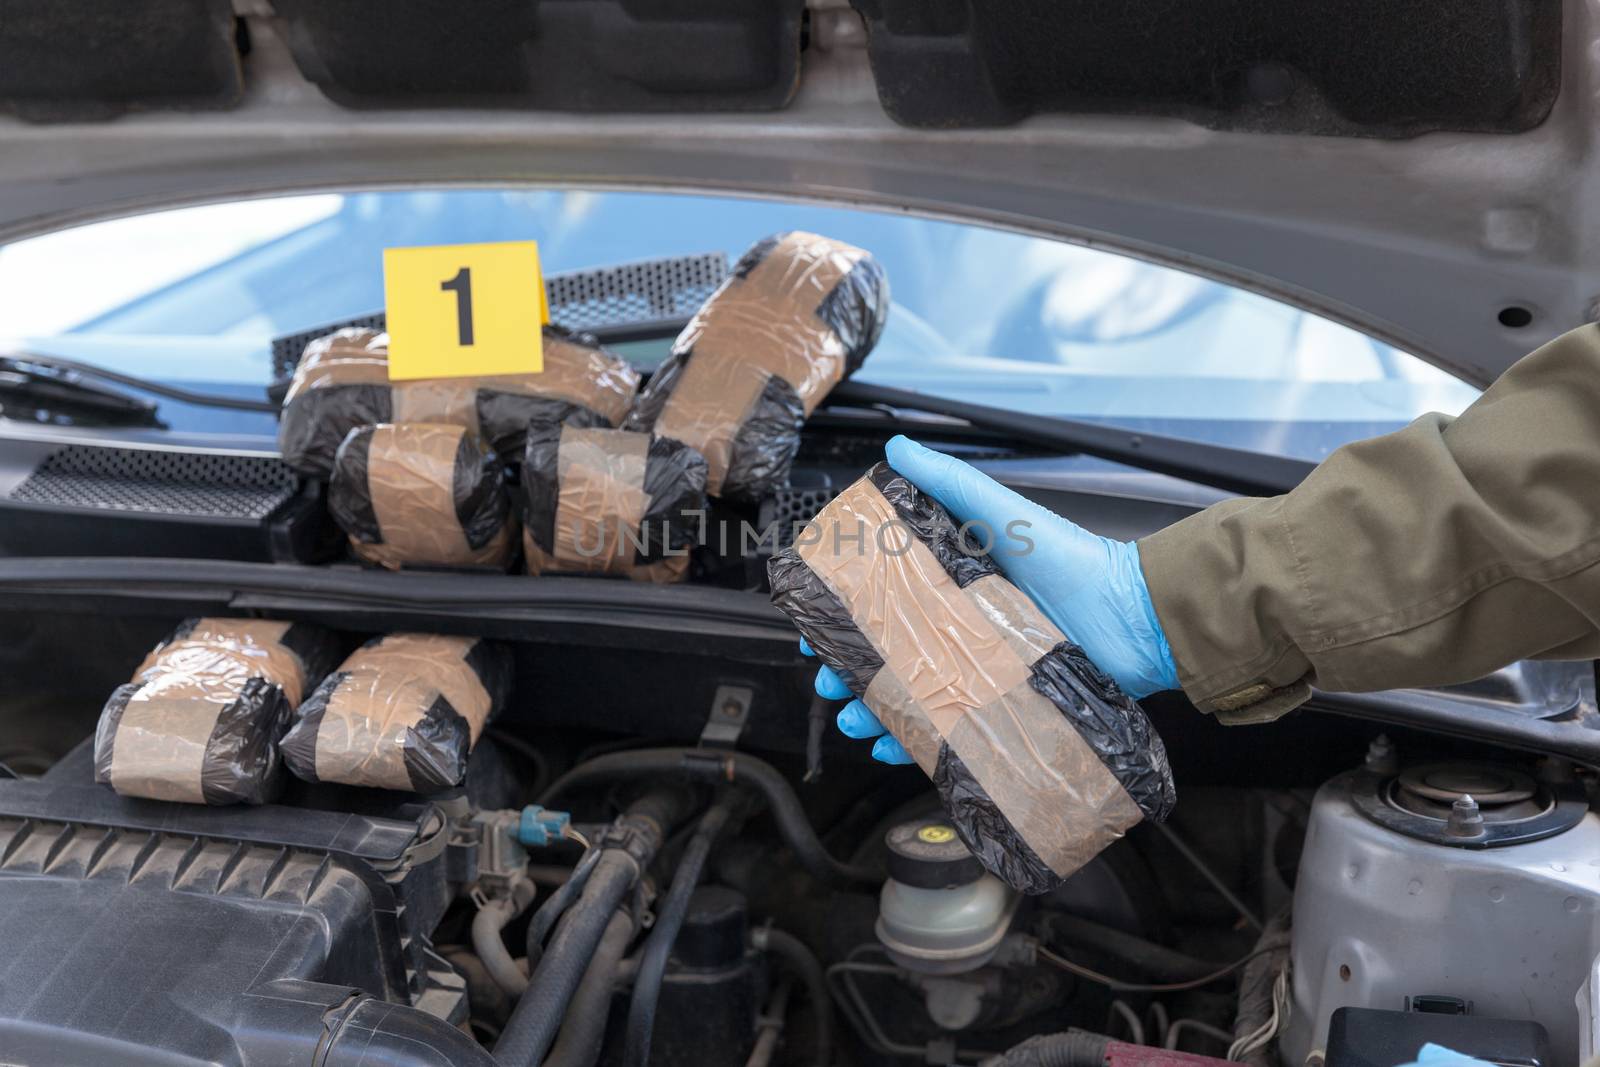 Drug smuggling in a car engine compartment by wellphoto